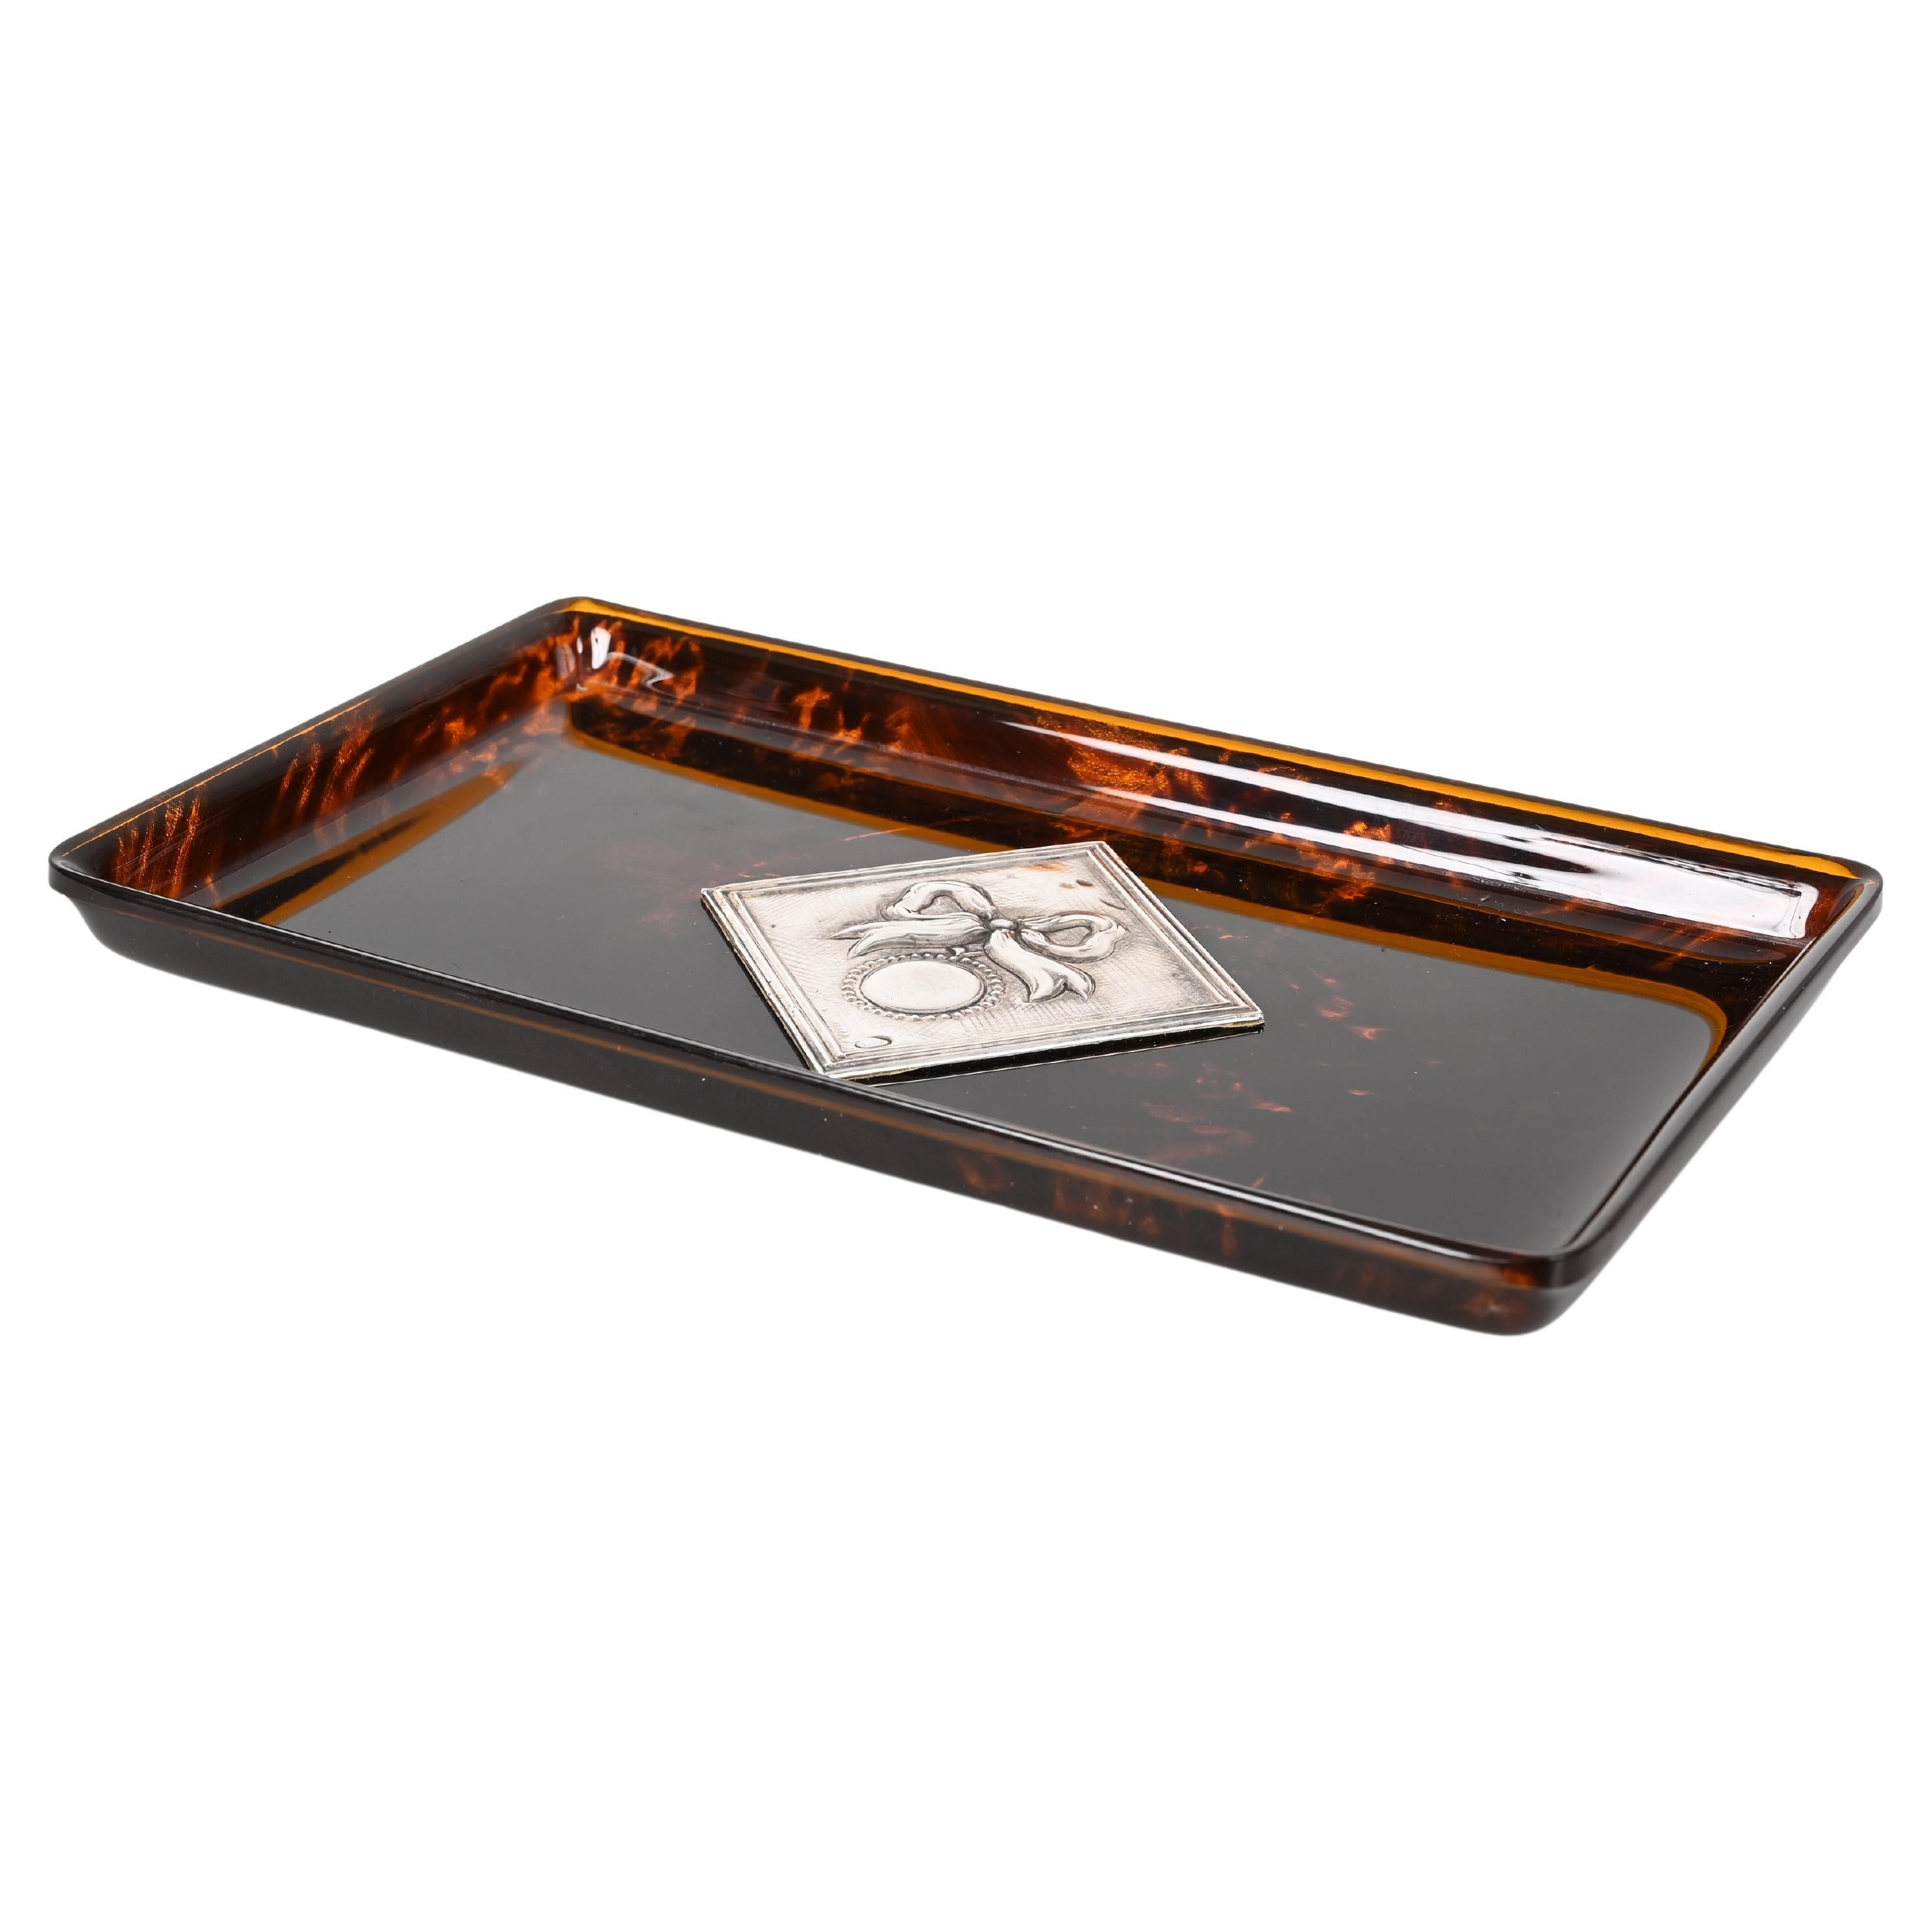 Midcentury Tortoiseshell Lucite and Silver French Serving Tray after Dior, 1970s